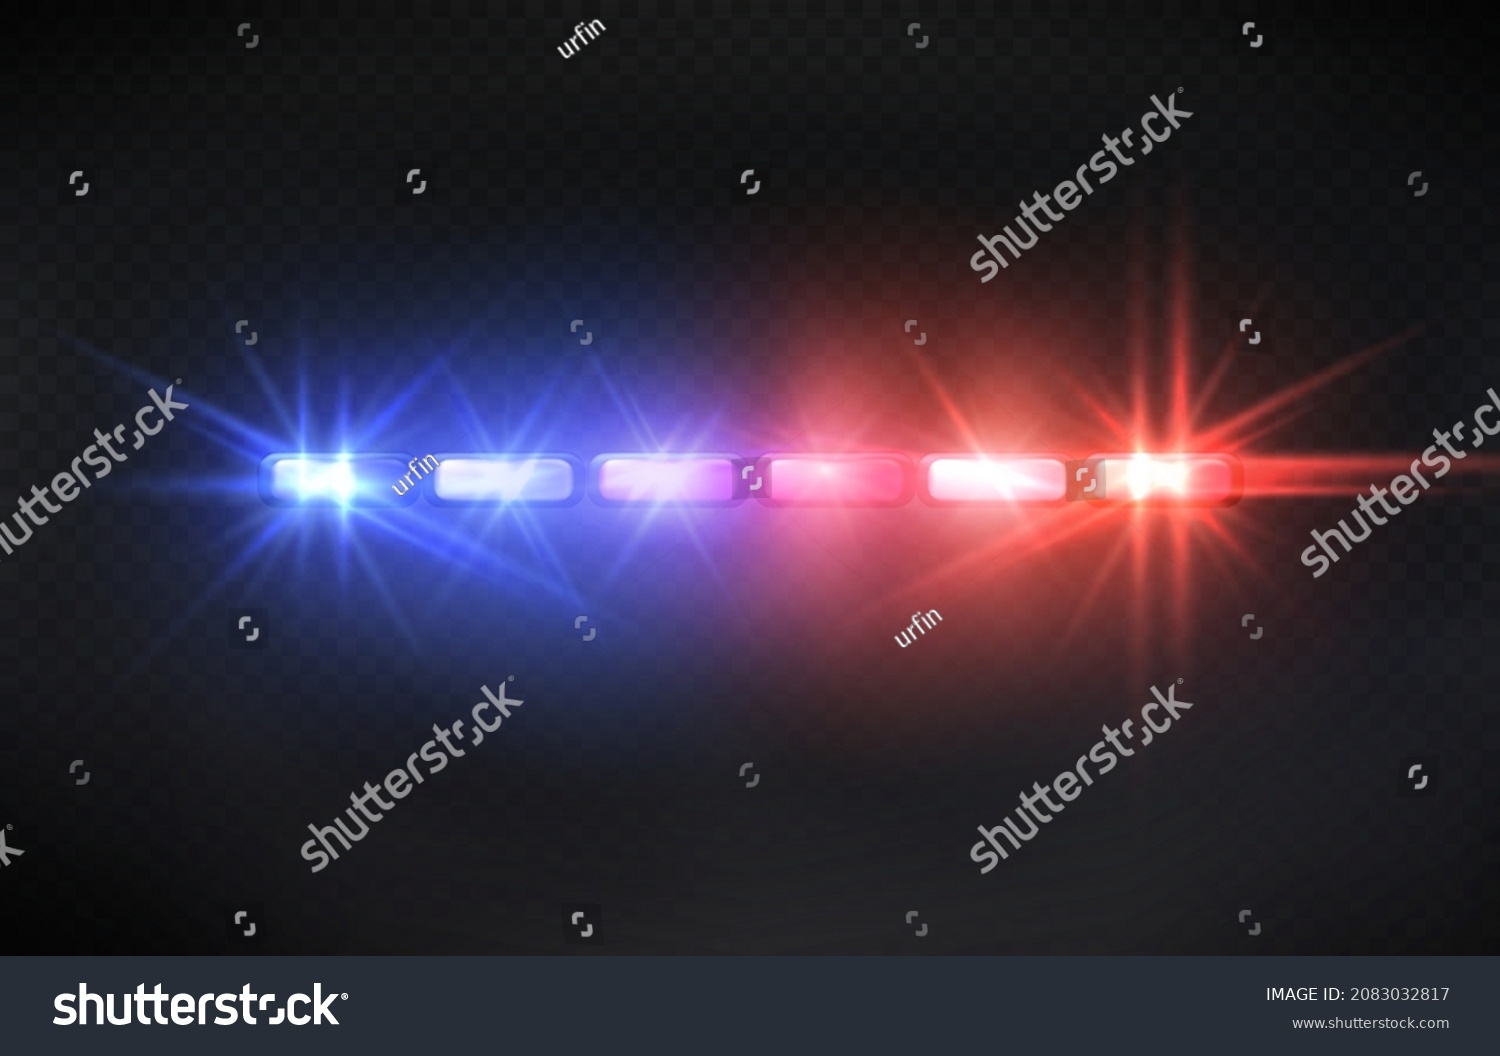 SVG of Police siren lights. Beacon flasher, policeman car flashing light and red blue safety sirens vector illustration svg